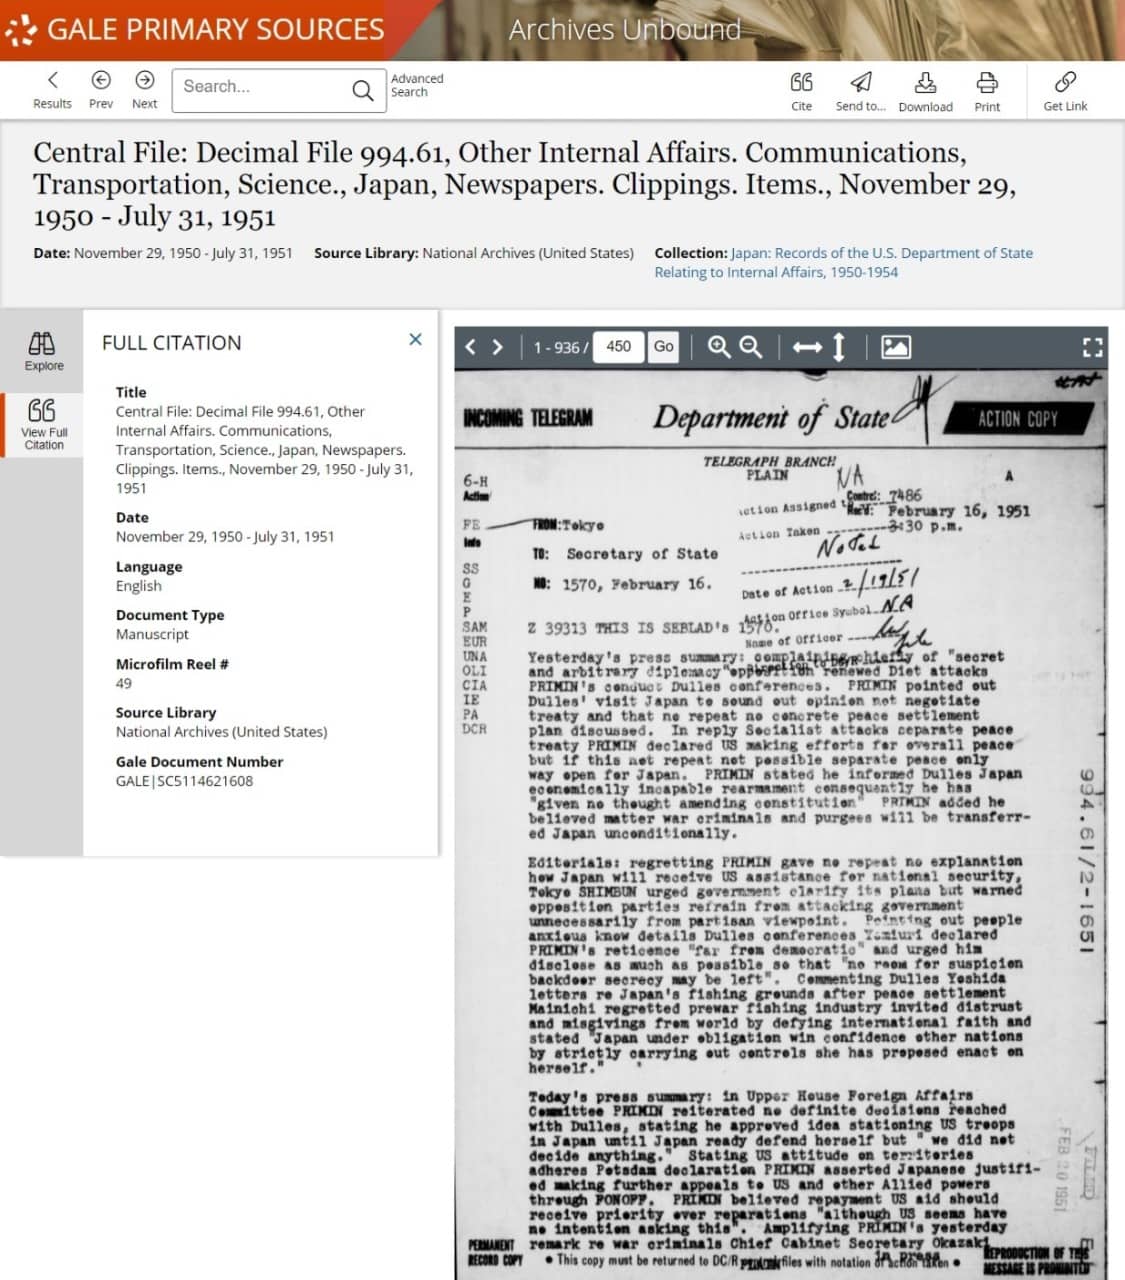 Central File: Decimal File 994.61, Other Internal Affairs. Communications, Transportation, Science., Japan, Newspapers. Clippings. Items., November 29, 1950 - July 31, 1951.